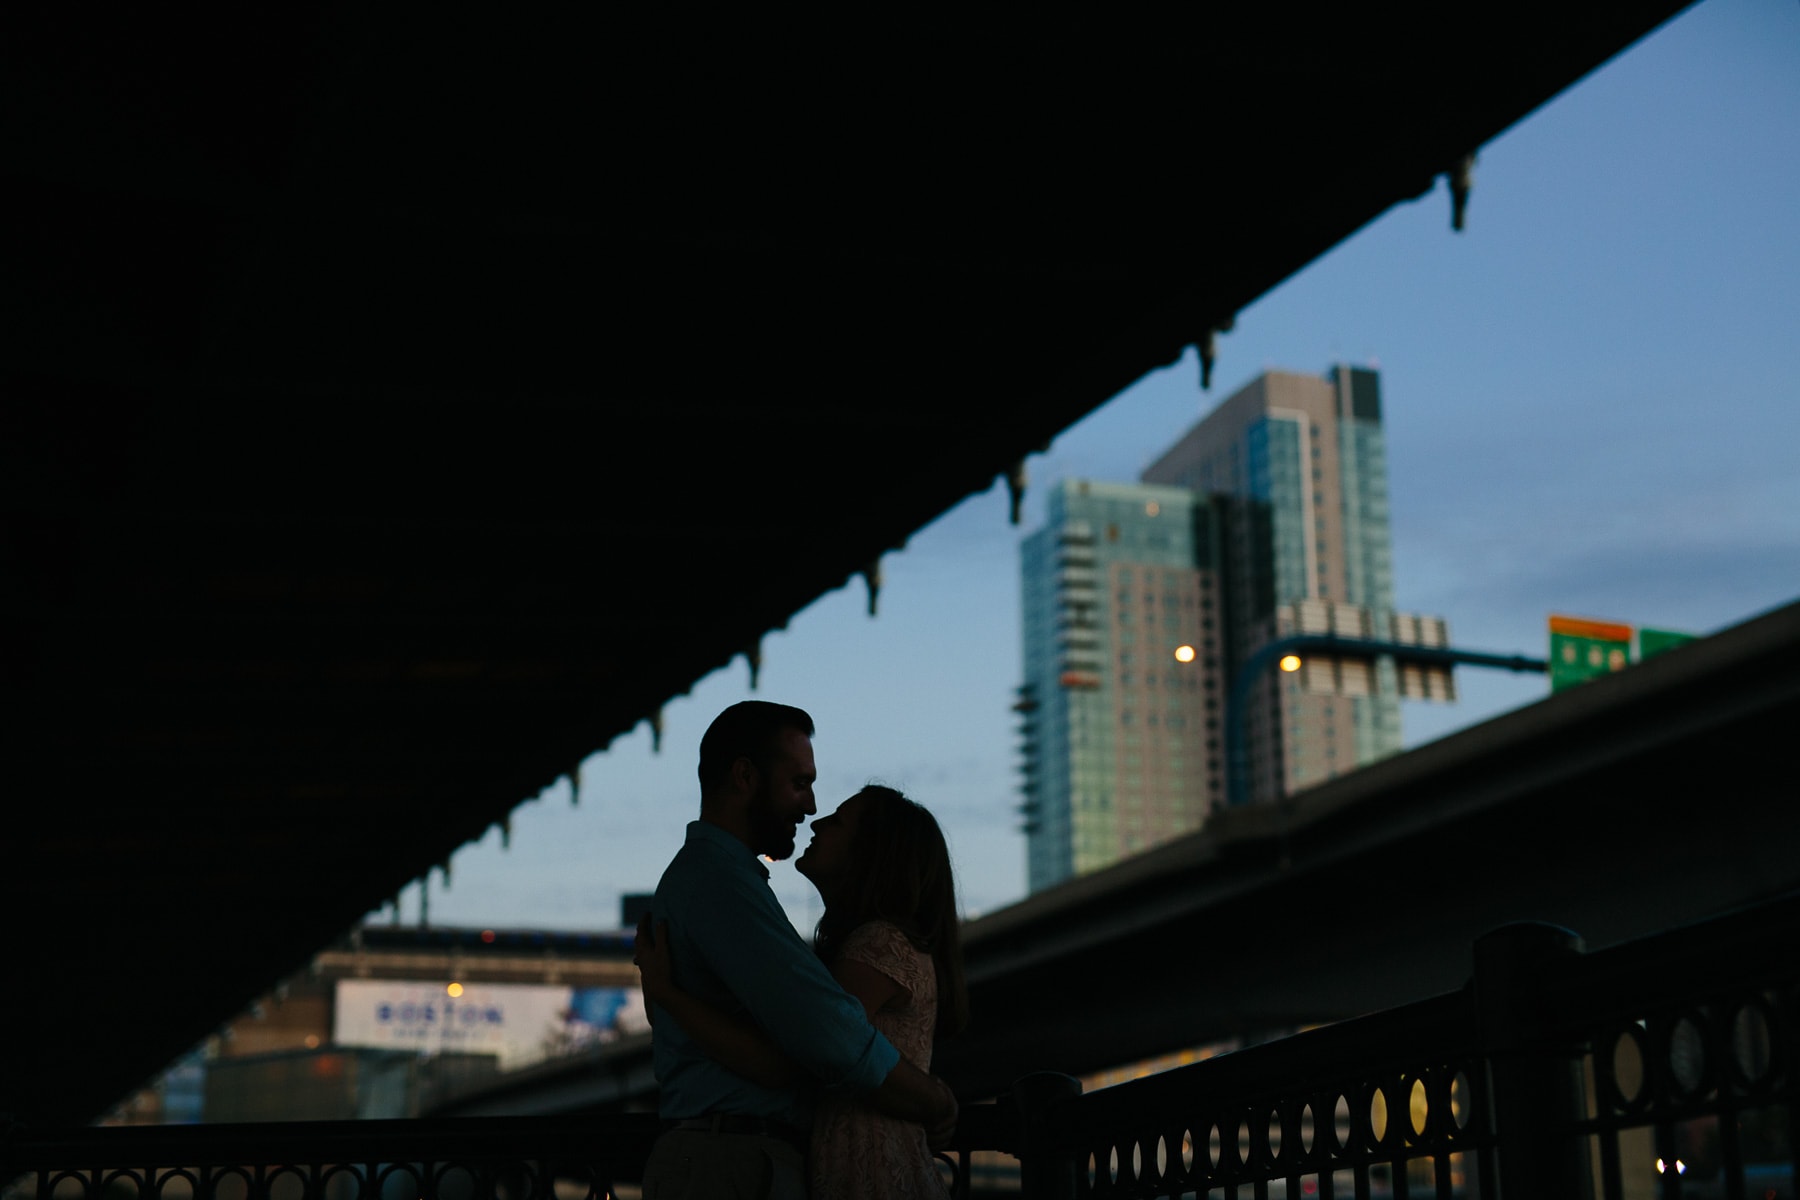 Peggy and Anthony's Boston engagement photography session by the Zakim Bridge - North Point Park | Kelly Benvenuto Photography | Boston Engagement Photographer